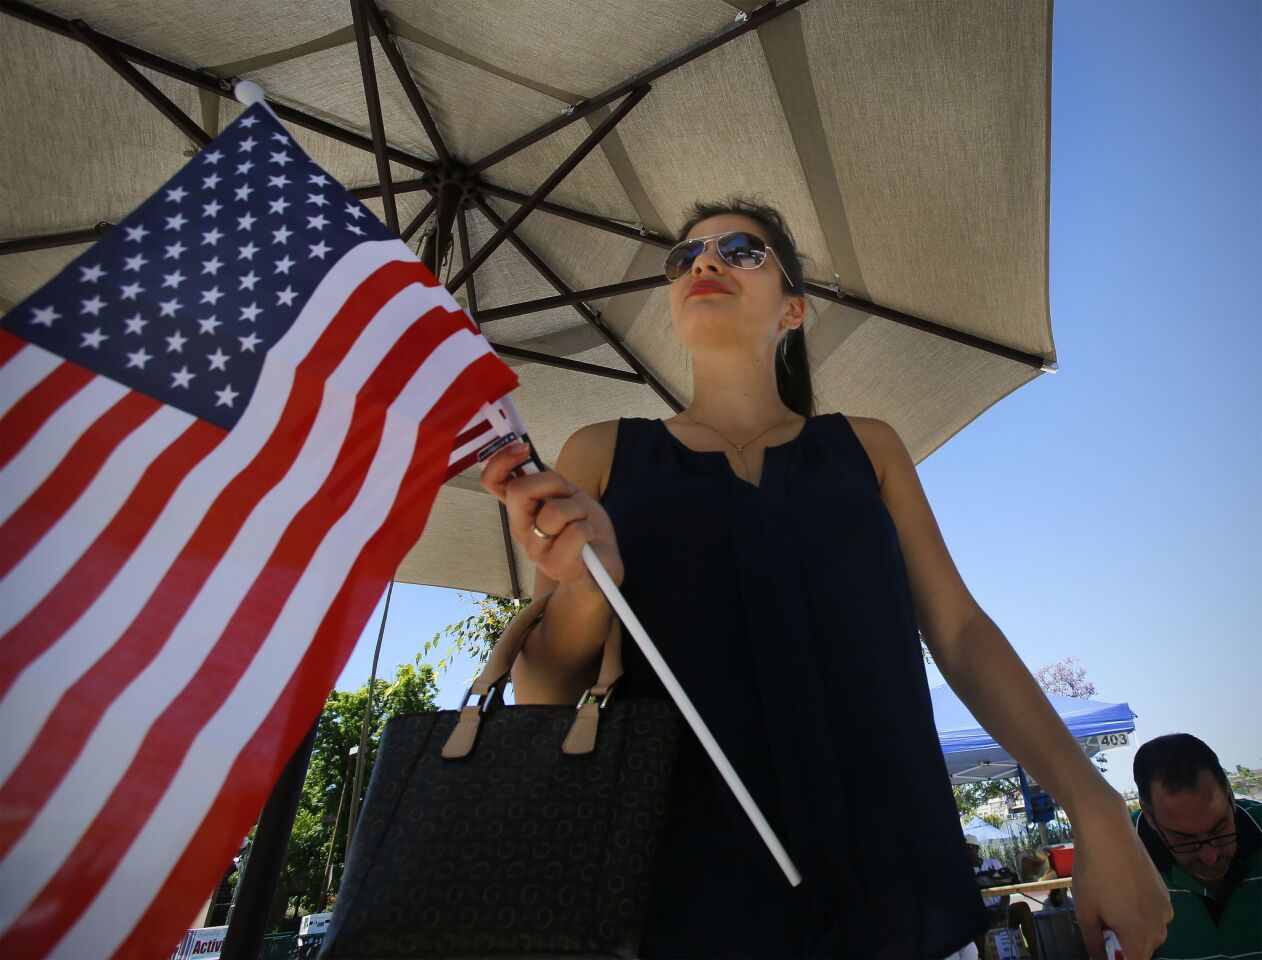 Abby Bogels originally from New Zealand was one of about 100 people from about 54 countries took the Oath of Allegiance to the United States of America in a naturalization ceremony held in Centennial Plaza near El Cajon City Hall to kickoff El Cajon's, America on Main Street festivities.